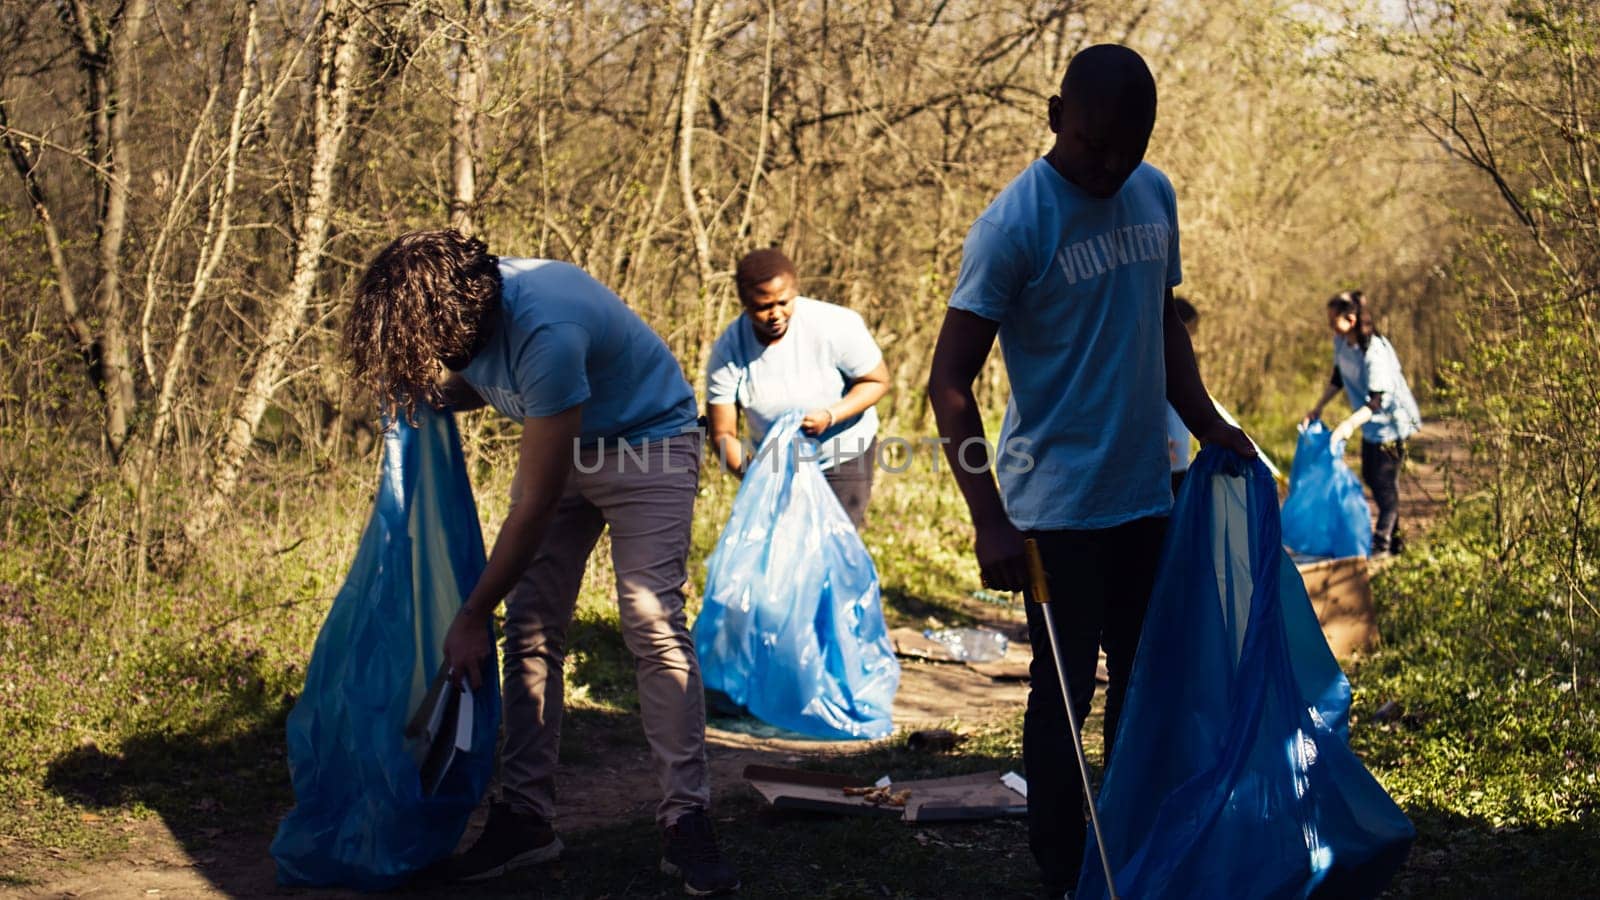 Diverse men volunteers pick up rubbish and plastic trash with tongs, working to combat illegal dumping and preserve natural forest environment. Activists volunteering for litter cleanup. Camera B.